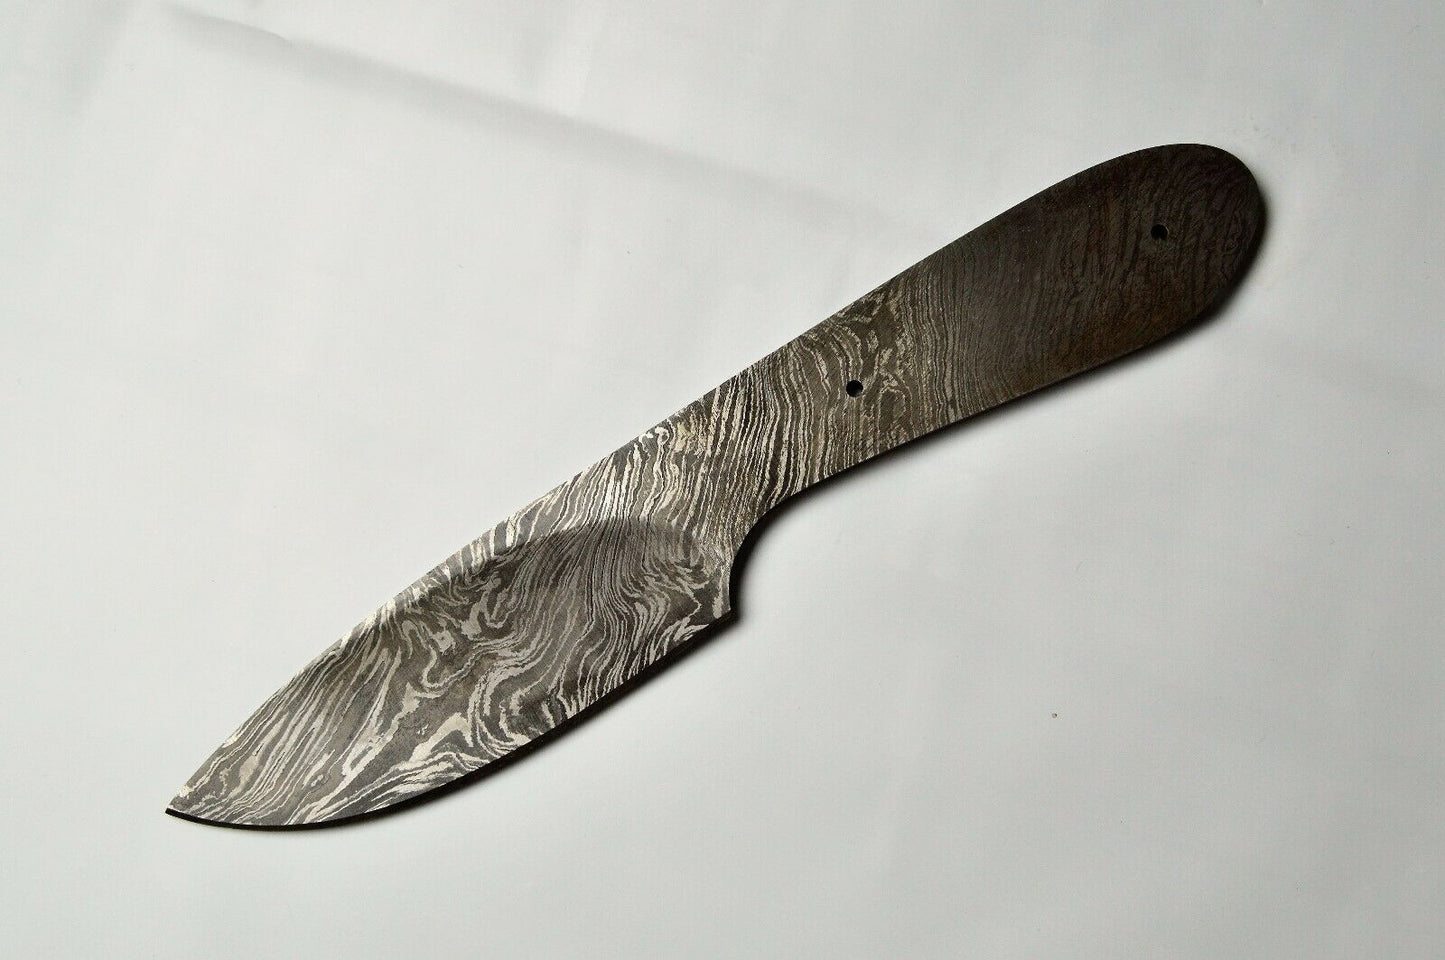 2 pieces Damascus steel blank blade set 8.5" and 8" long hand forged steel